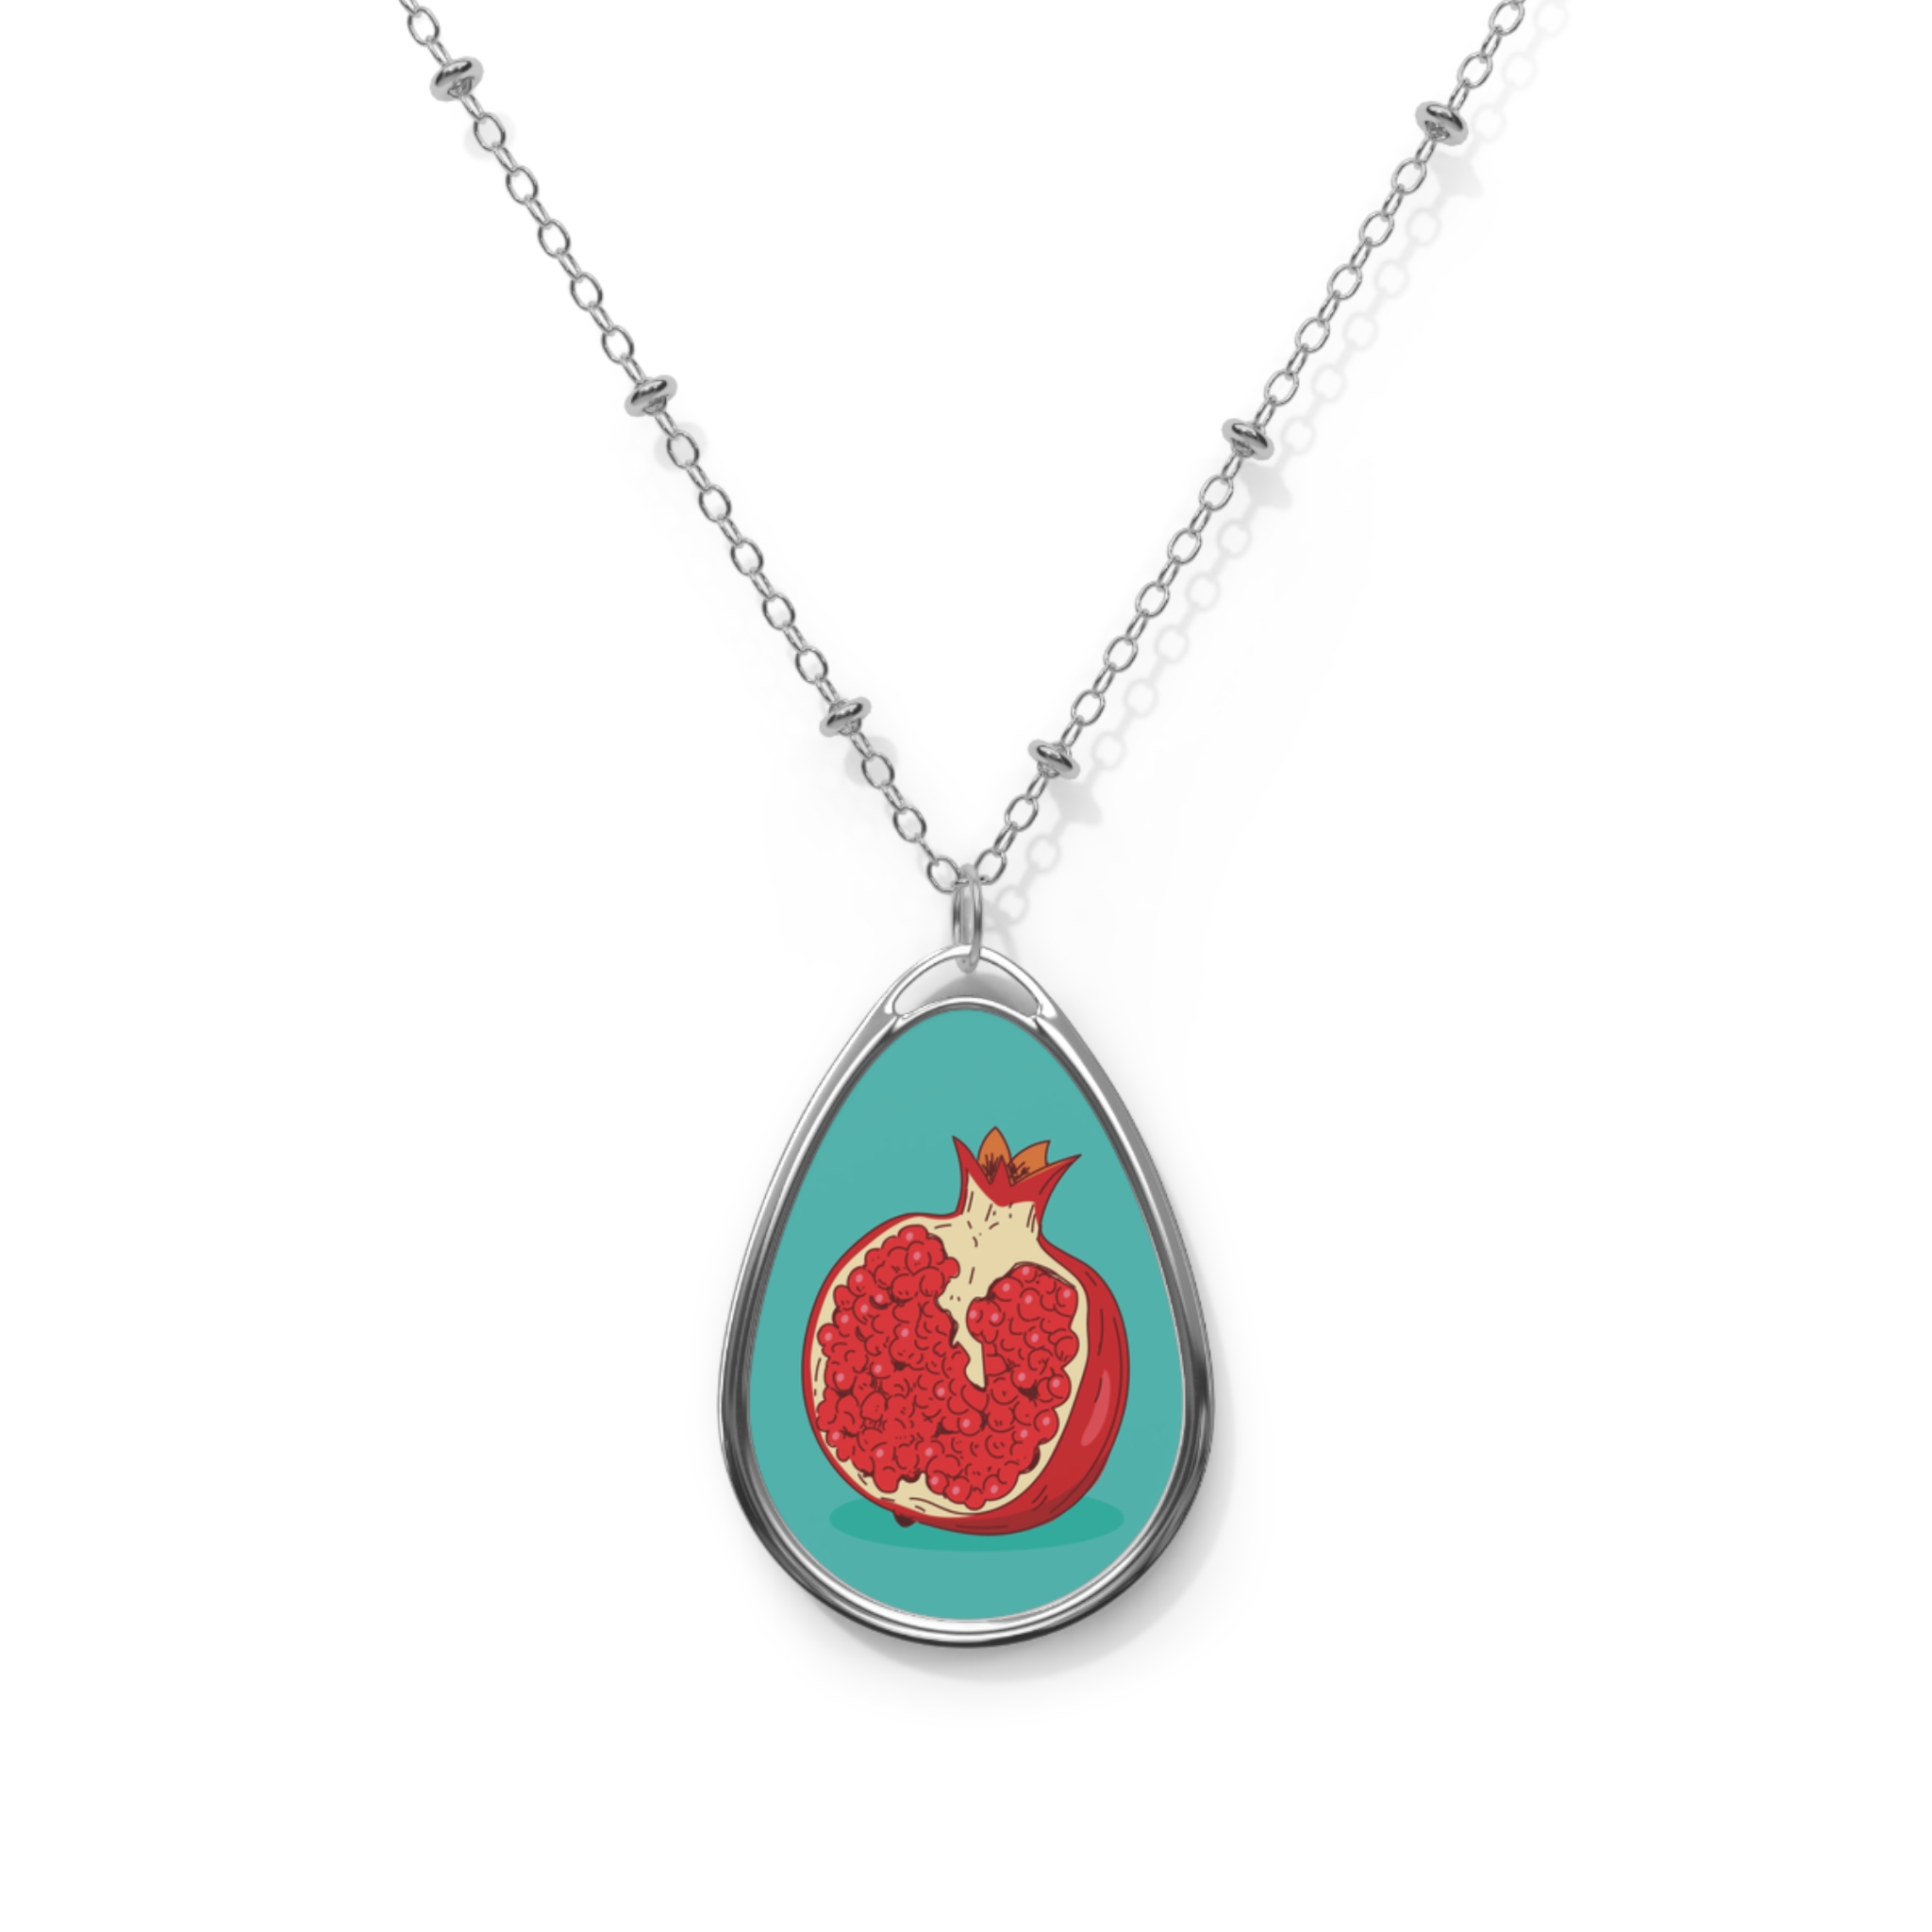 Oval Necklace- Pomegranate post thumbnail image